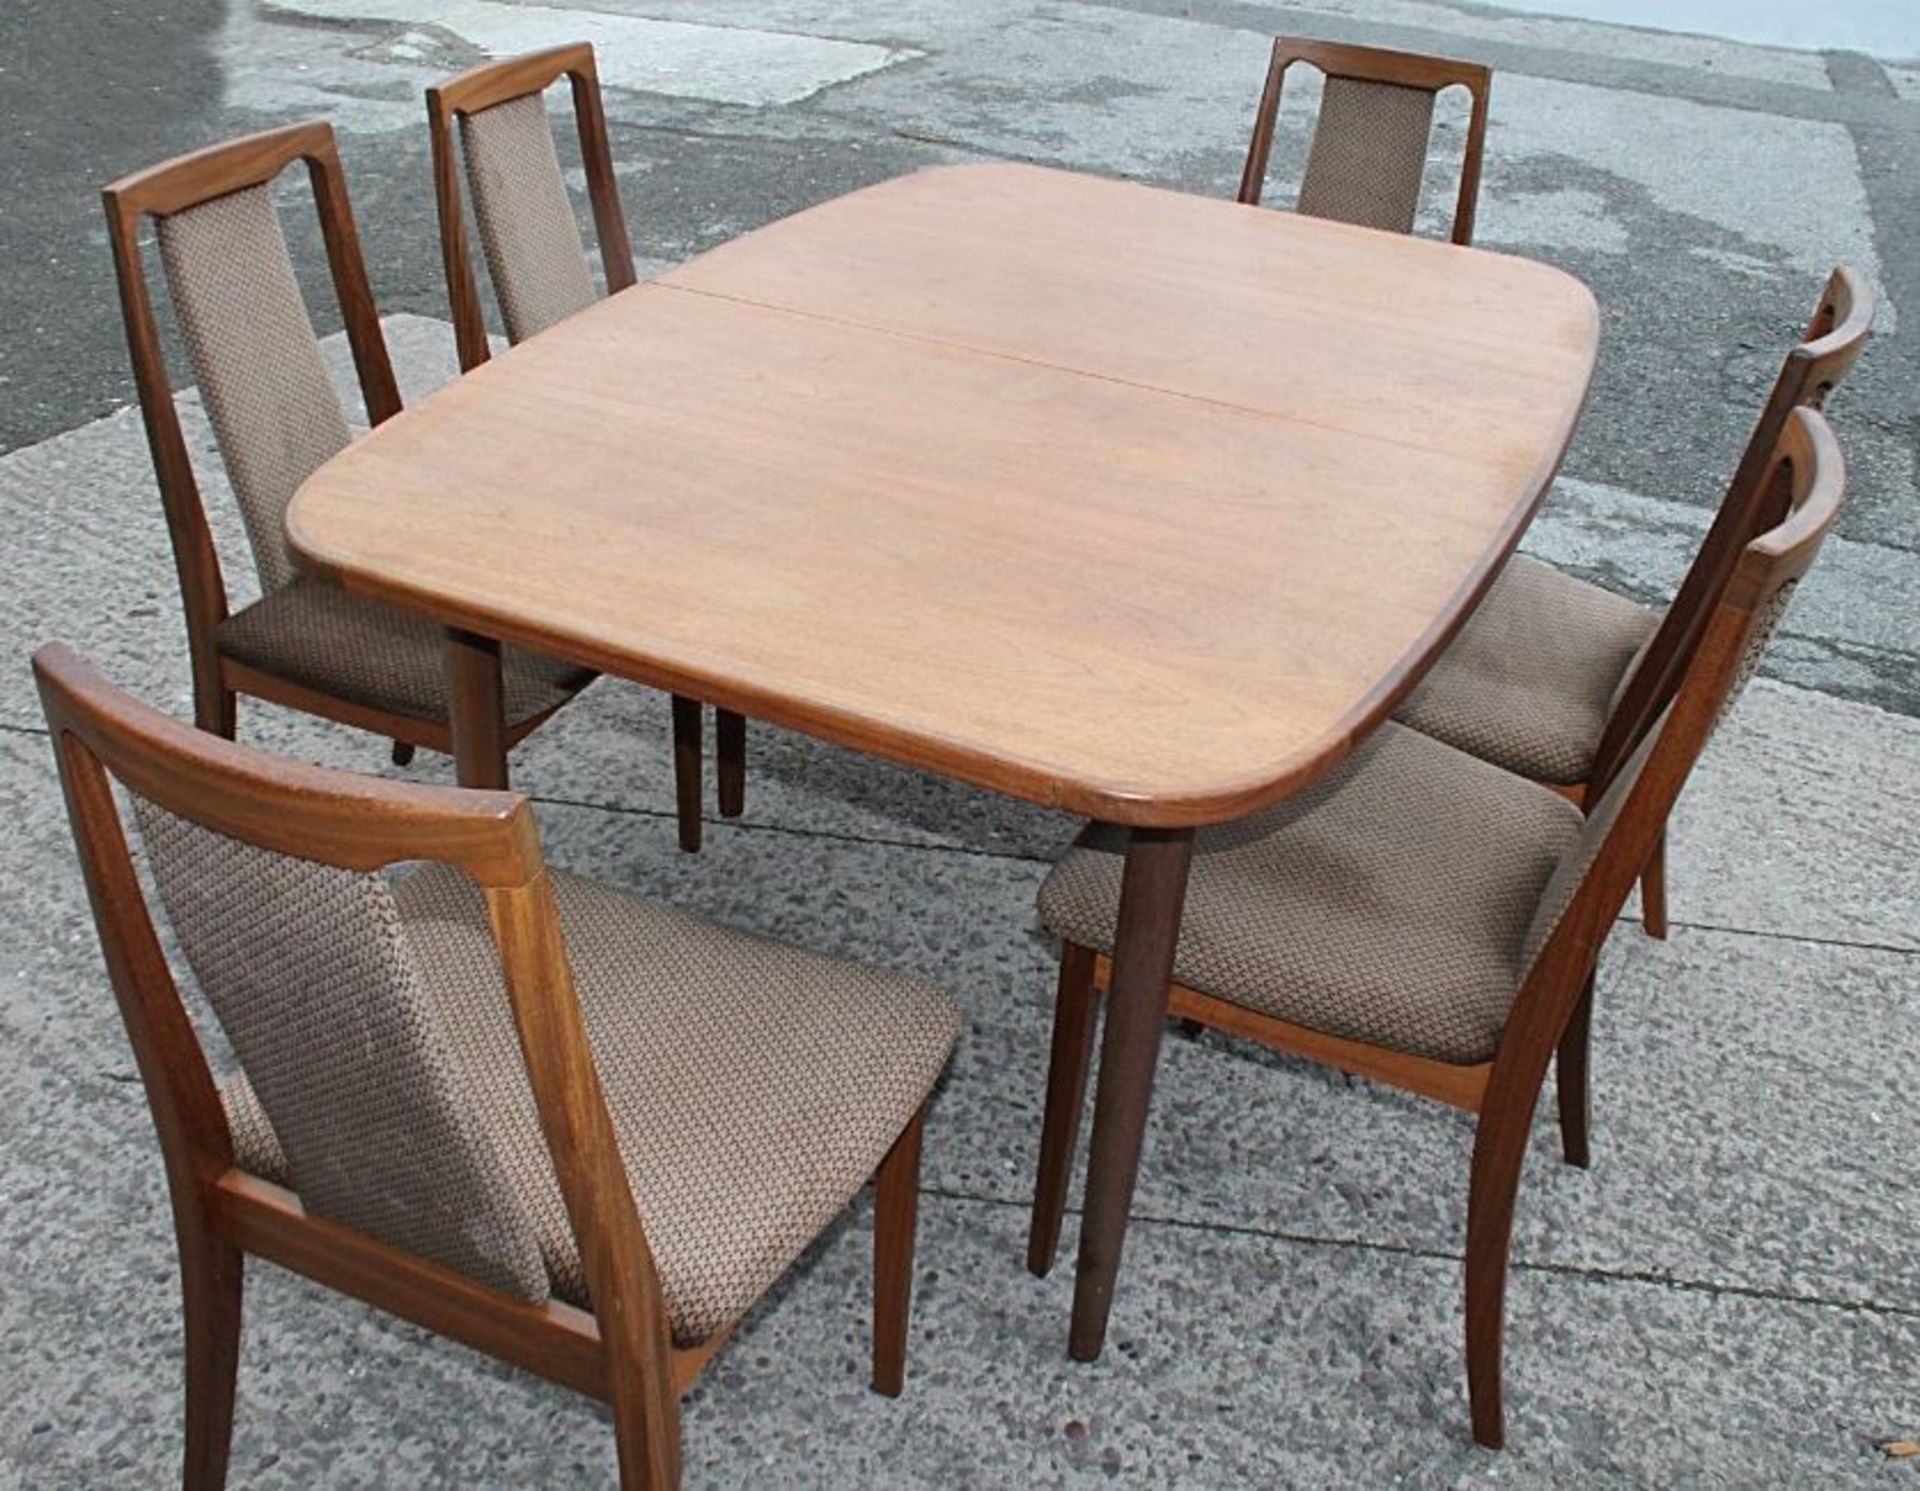 1 x Vintage G-PLAN Extending Dining Table With 6 x Dralon Upholstered G-PLAN Chairs  - CL758 - - Image 6 of 17